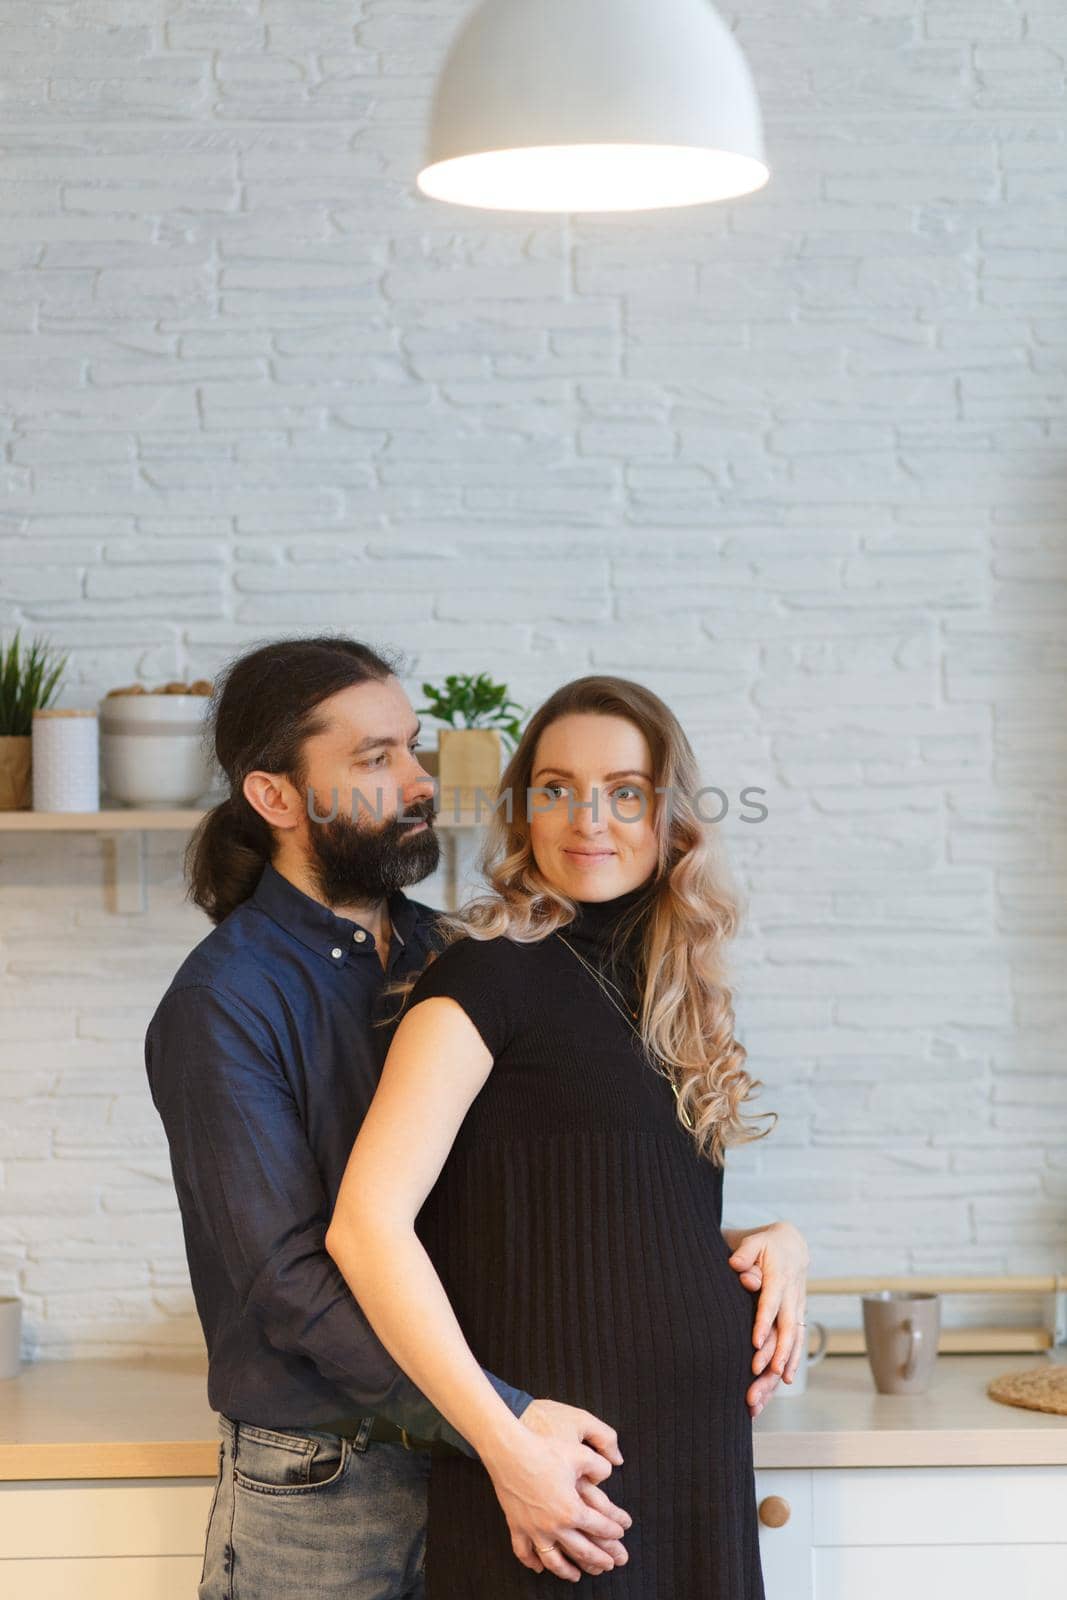 Man embracing pregnant partner in kitchen. Adult family pregnancy concept. Future parents in home outfit embrace standing in the kitchen, looking at each other, kissing. Healthy Lifestyle.